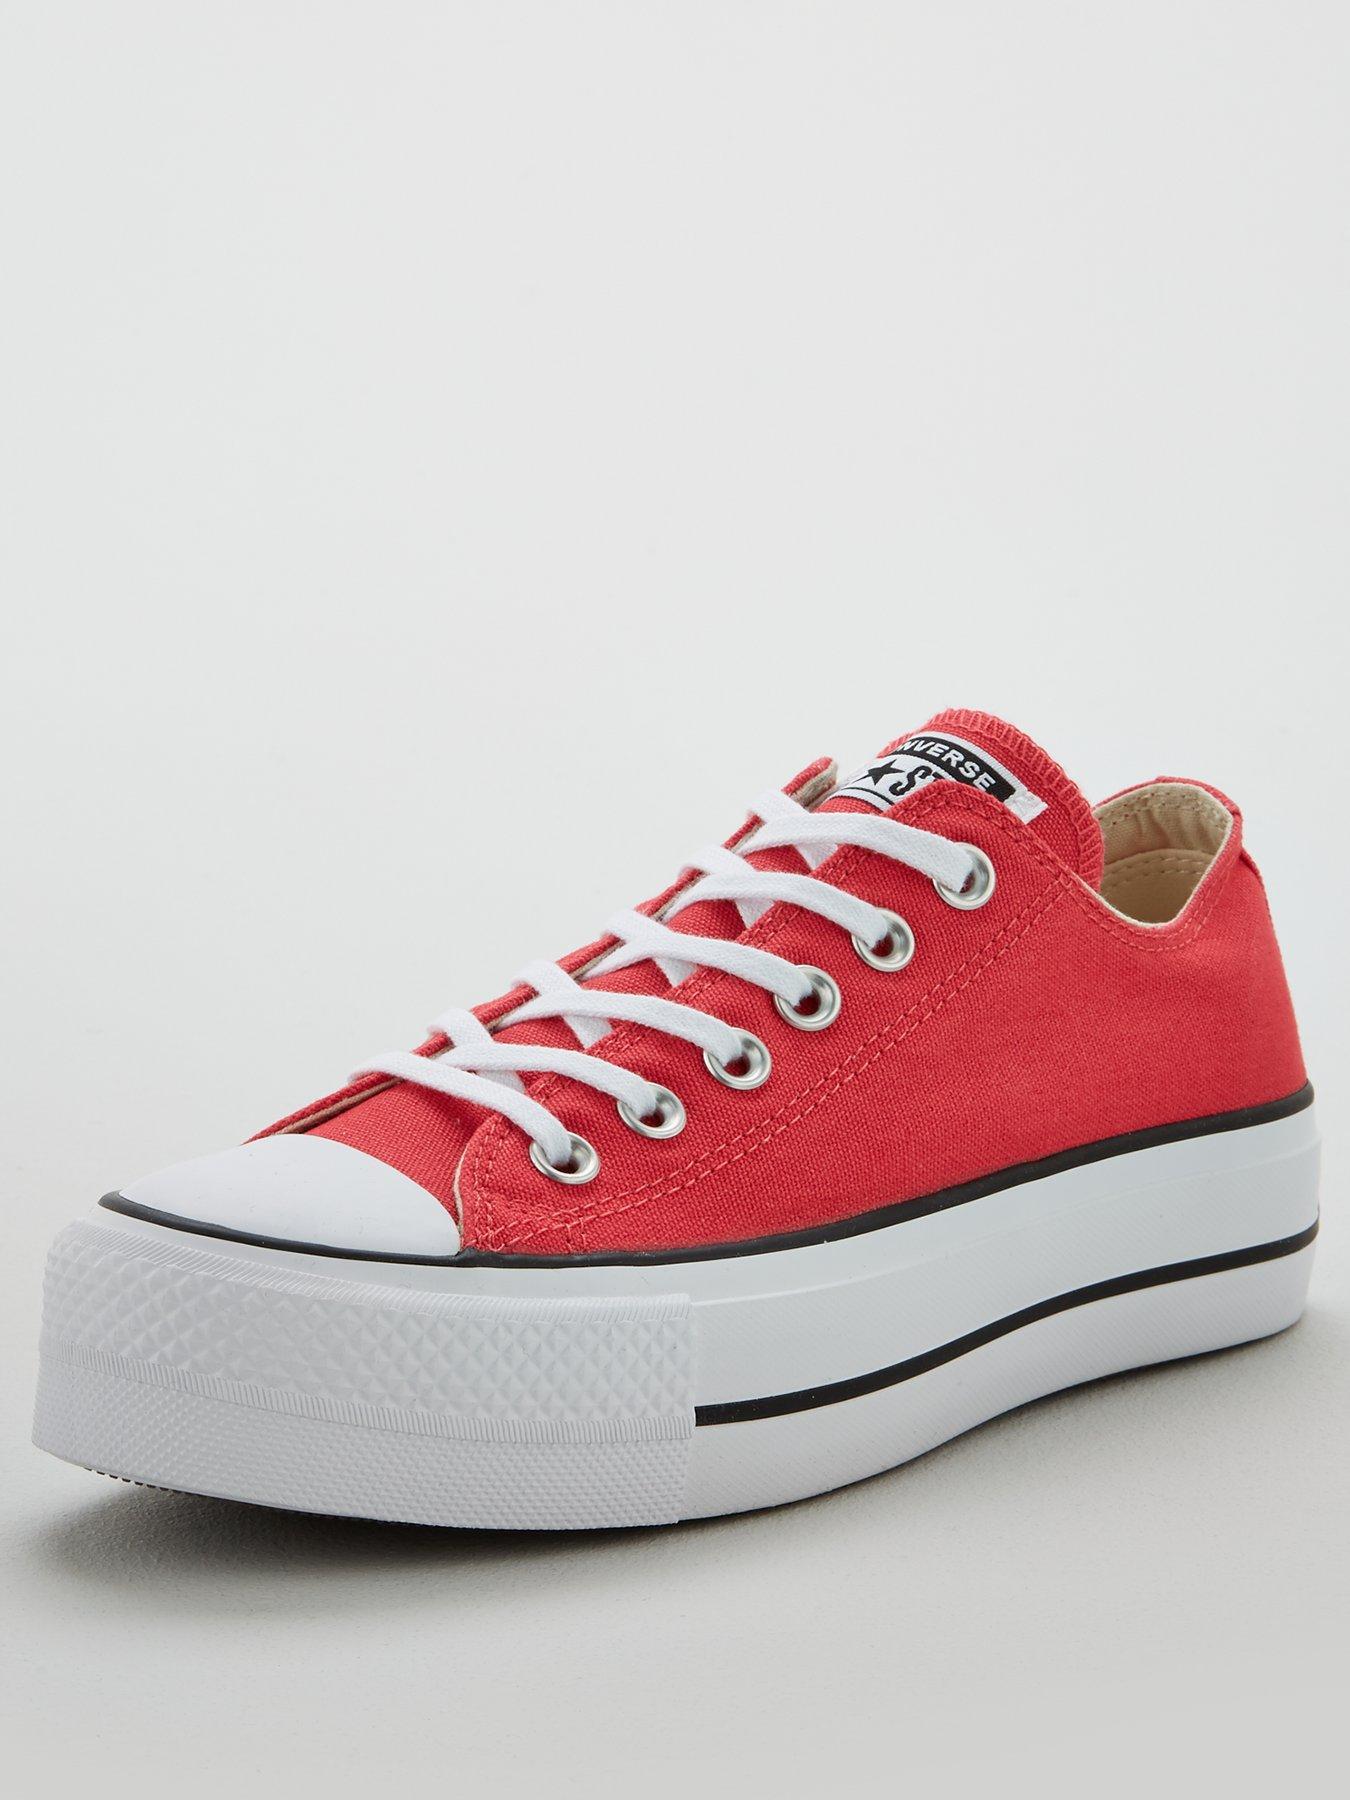 Converse Chuck Taylor All Star Lift Platform Ox - Red | very.co.uk